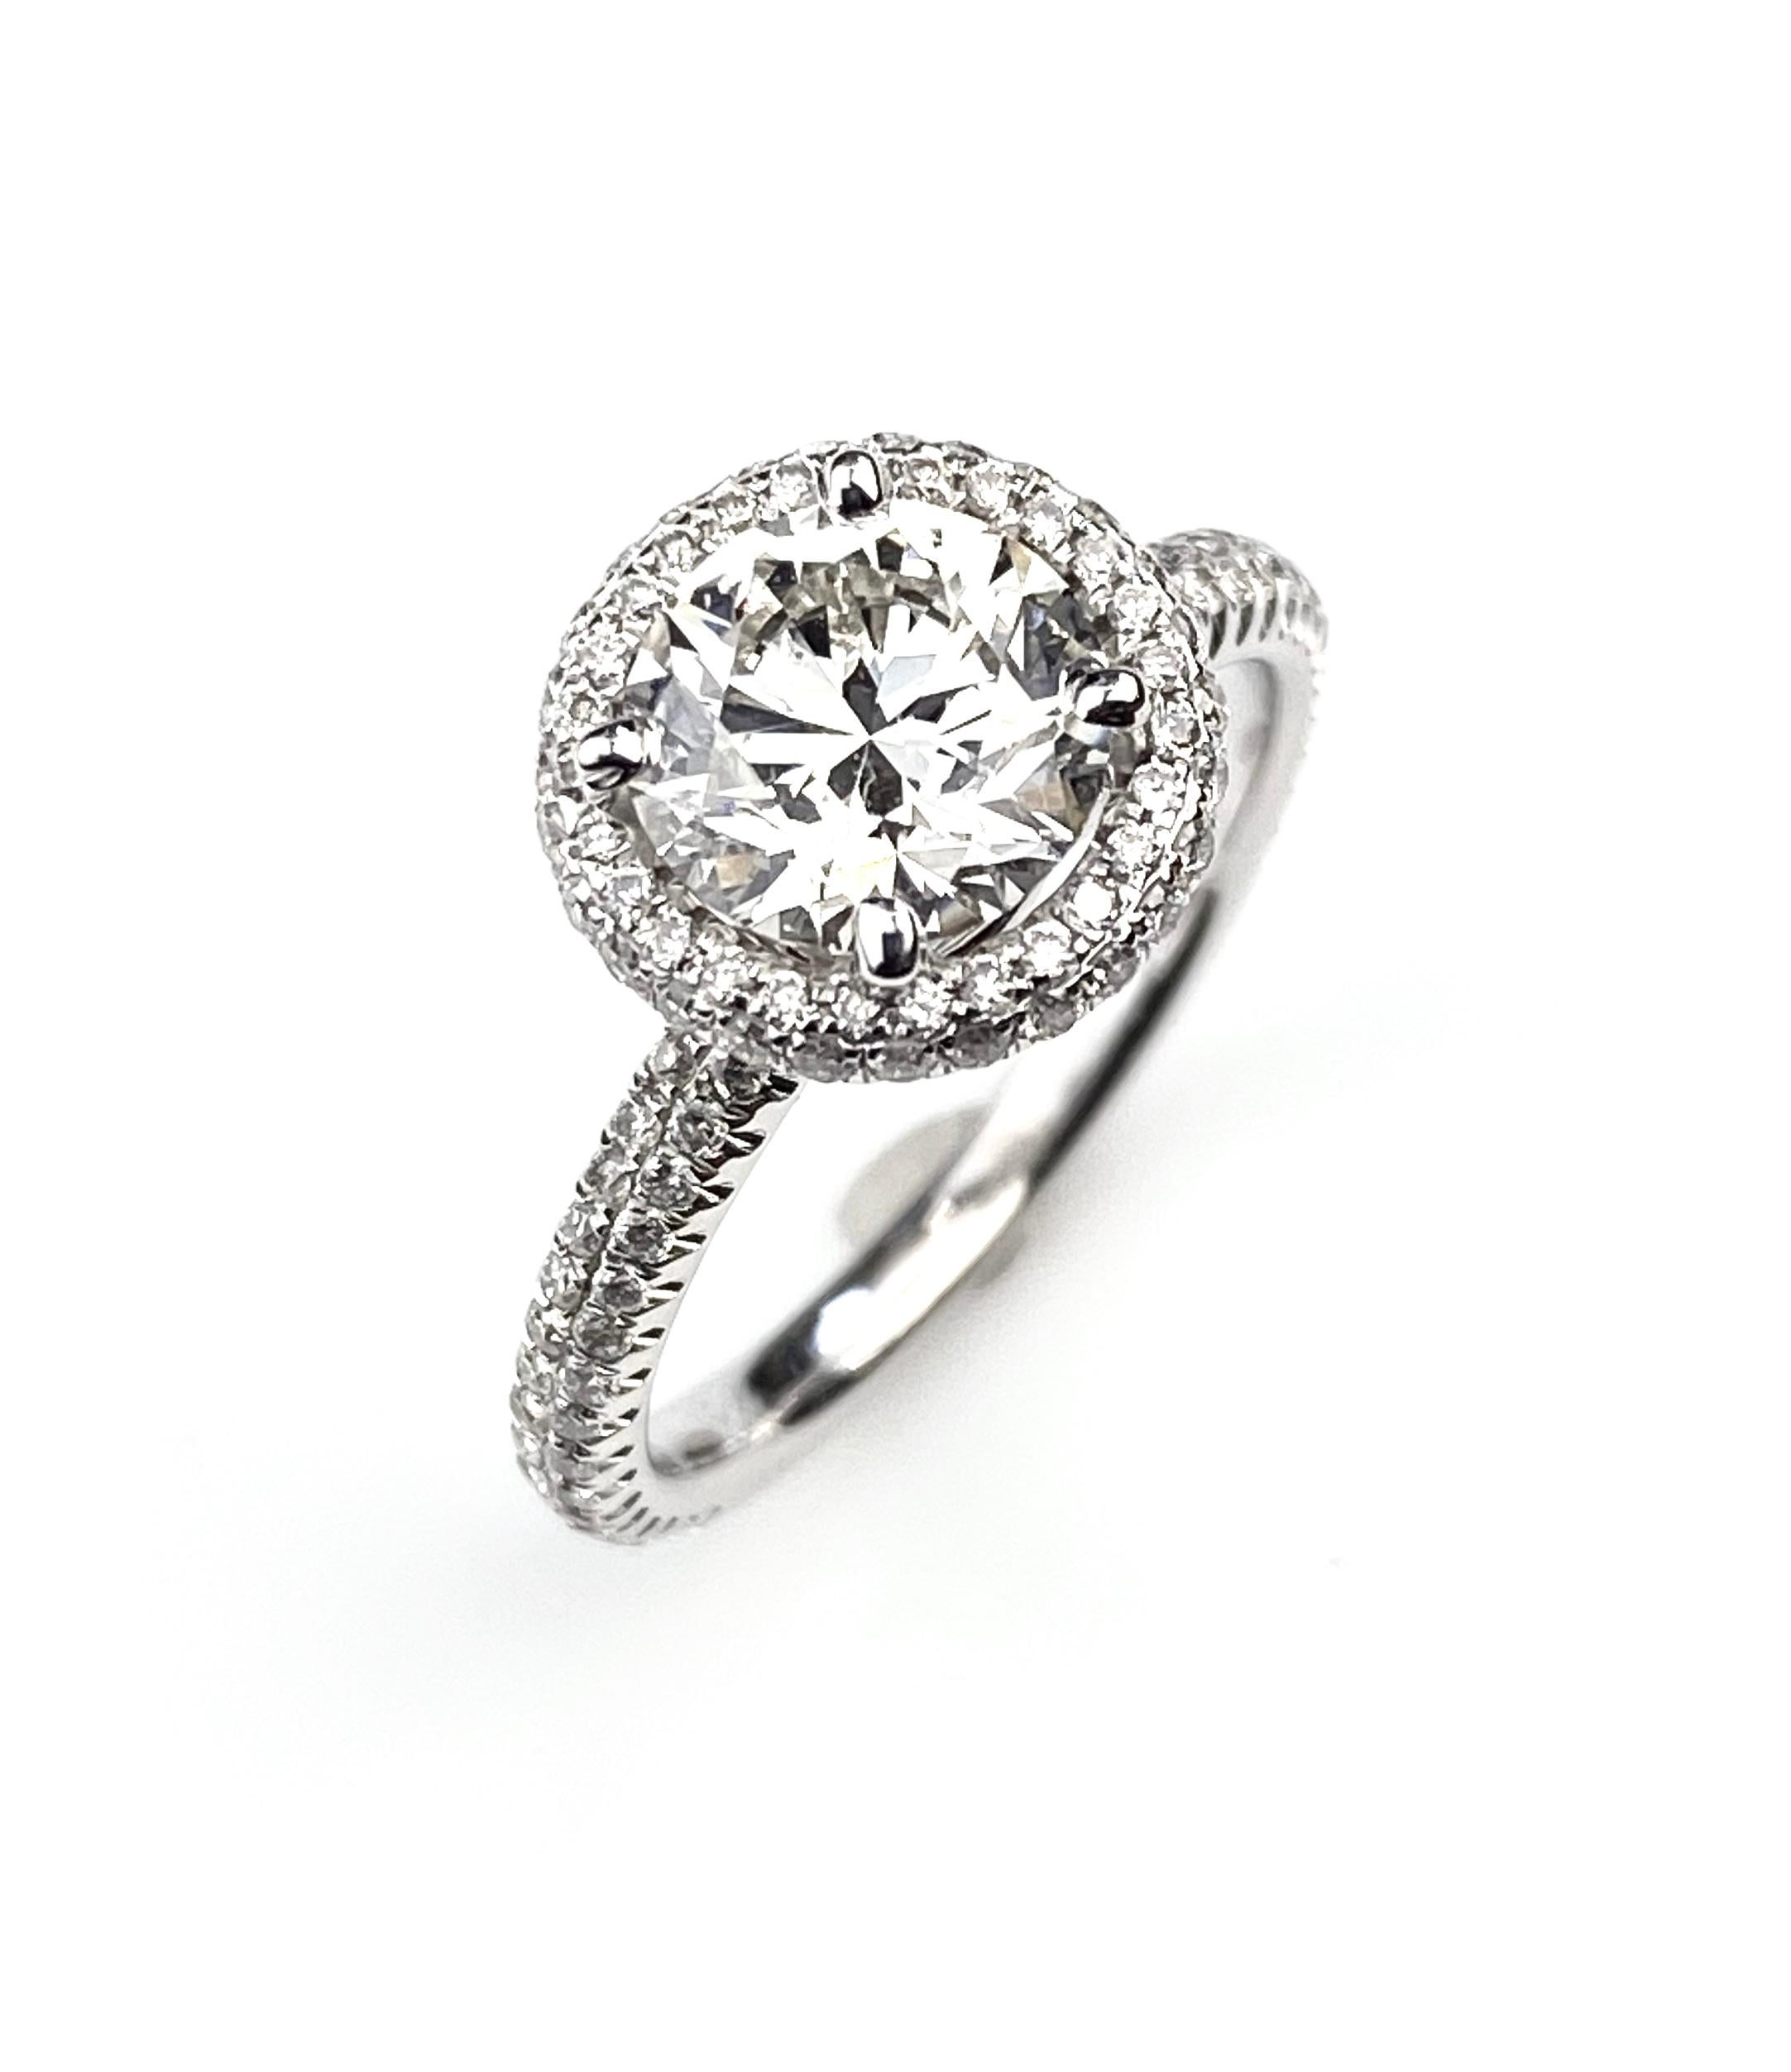 Ladies' round halo engagement ring in 18kt white gold, set with GIA graded 1.52 I SI1, GIA number 2117810529, brilliant round cut diamond. Surrounded by 0.56ct of micro-pave' set diamonds, 7/8 eternity. Side diamonds are F/G colour and VS/SI1